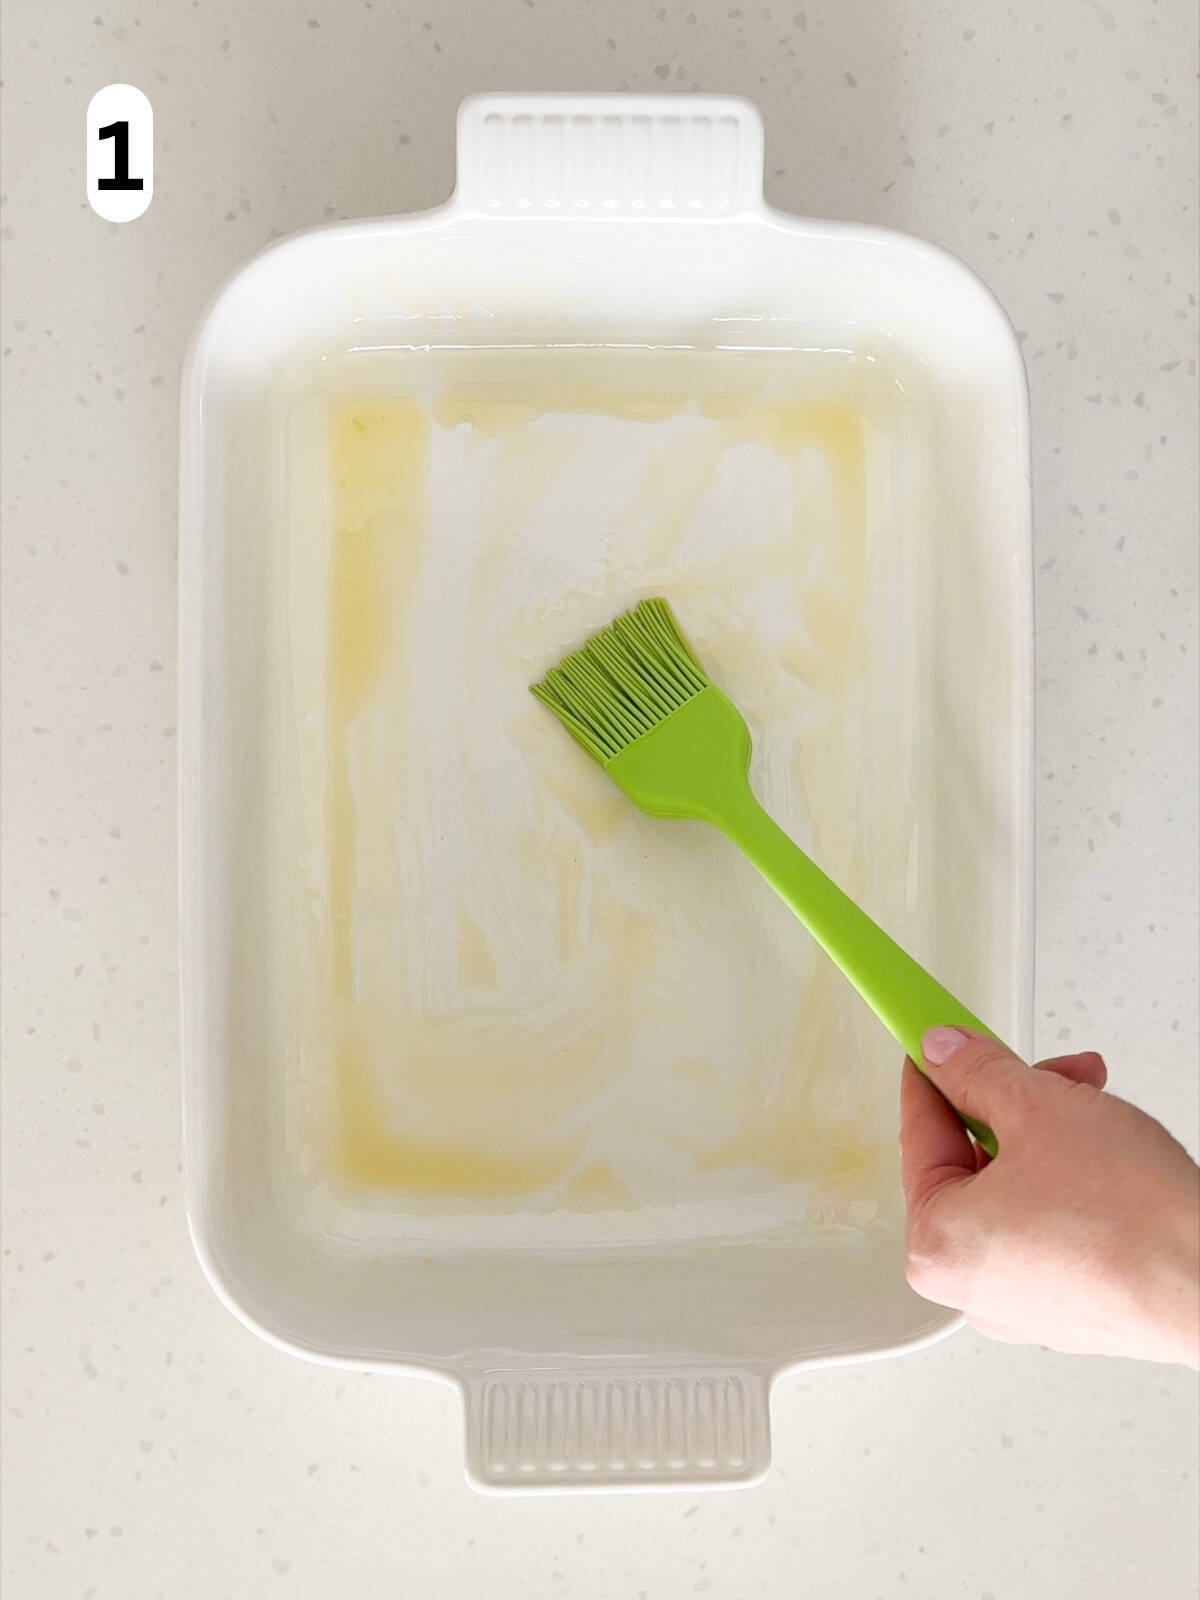 A baking dish is brushed with olive oil.